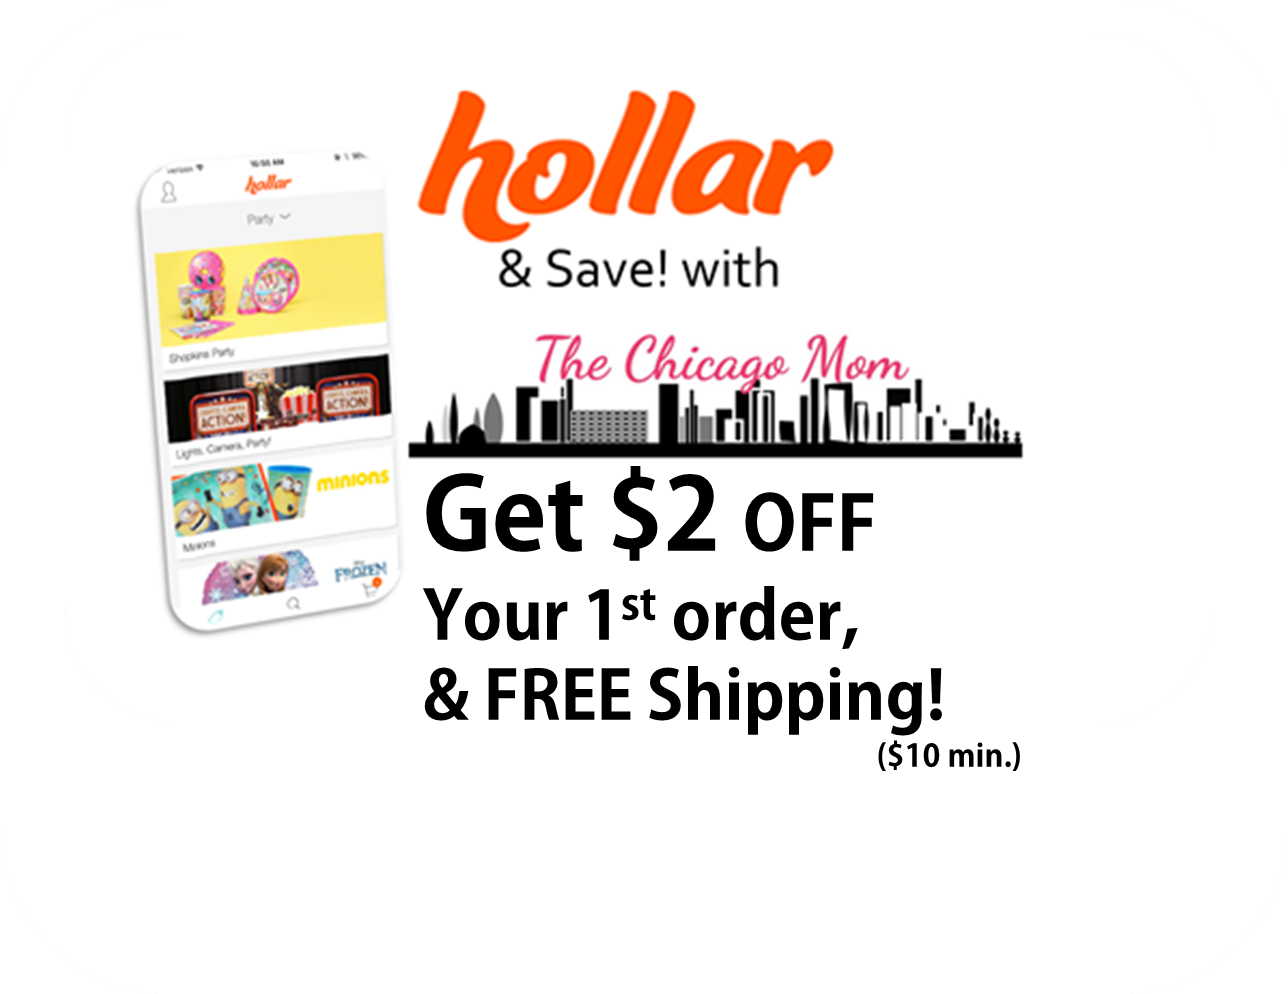 $2 off and Free Shipping on your 1st order: https://www.hollar.com/share/7jypr5w3